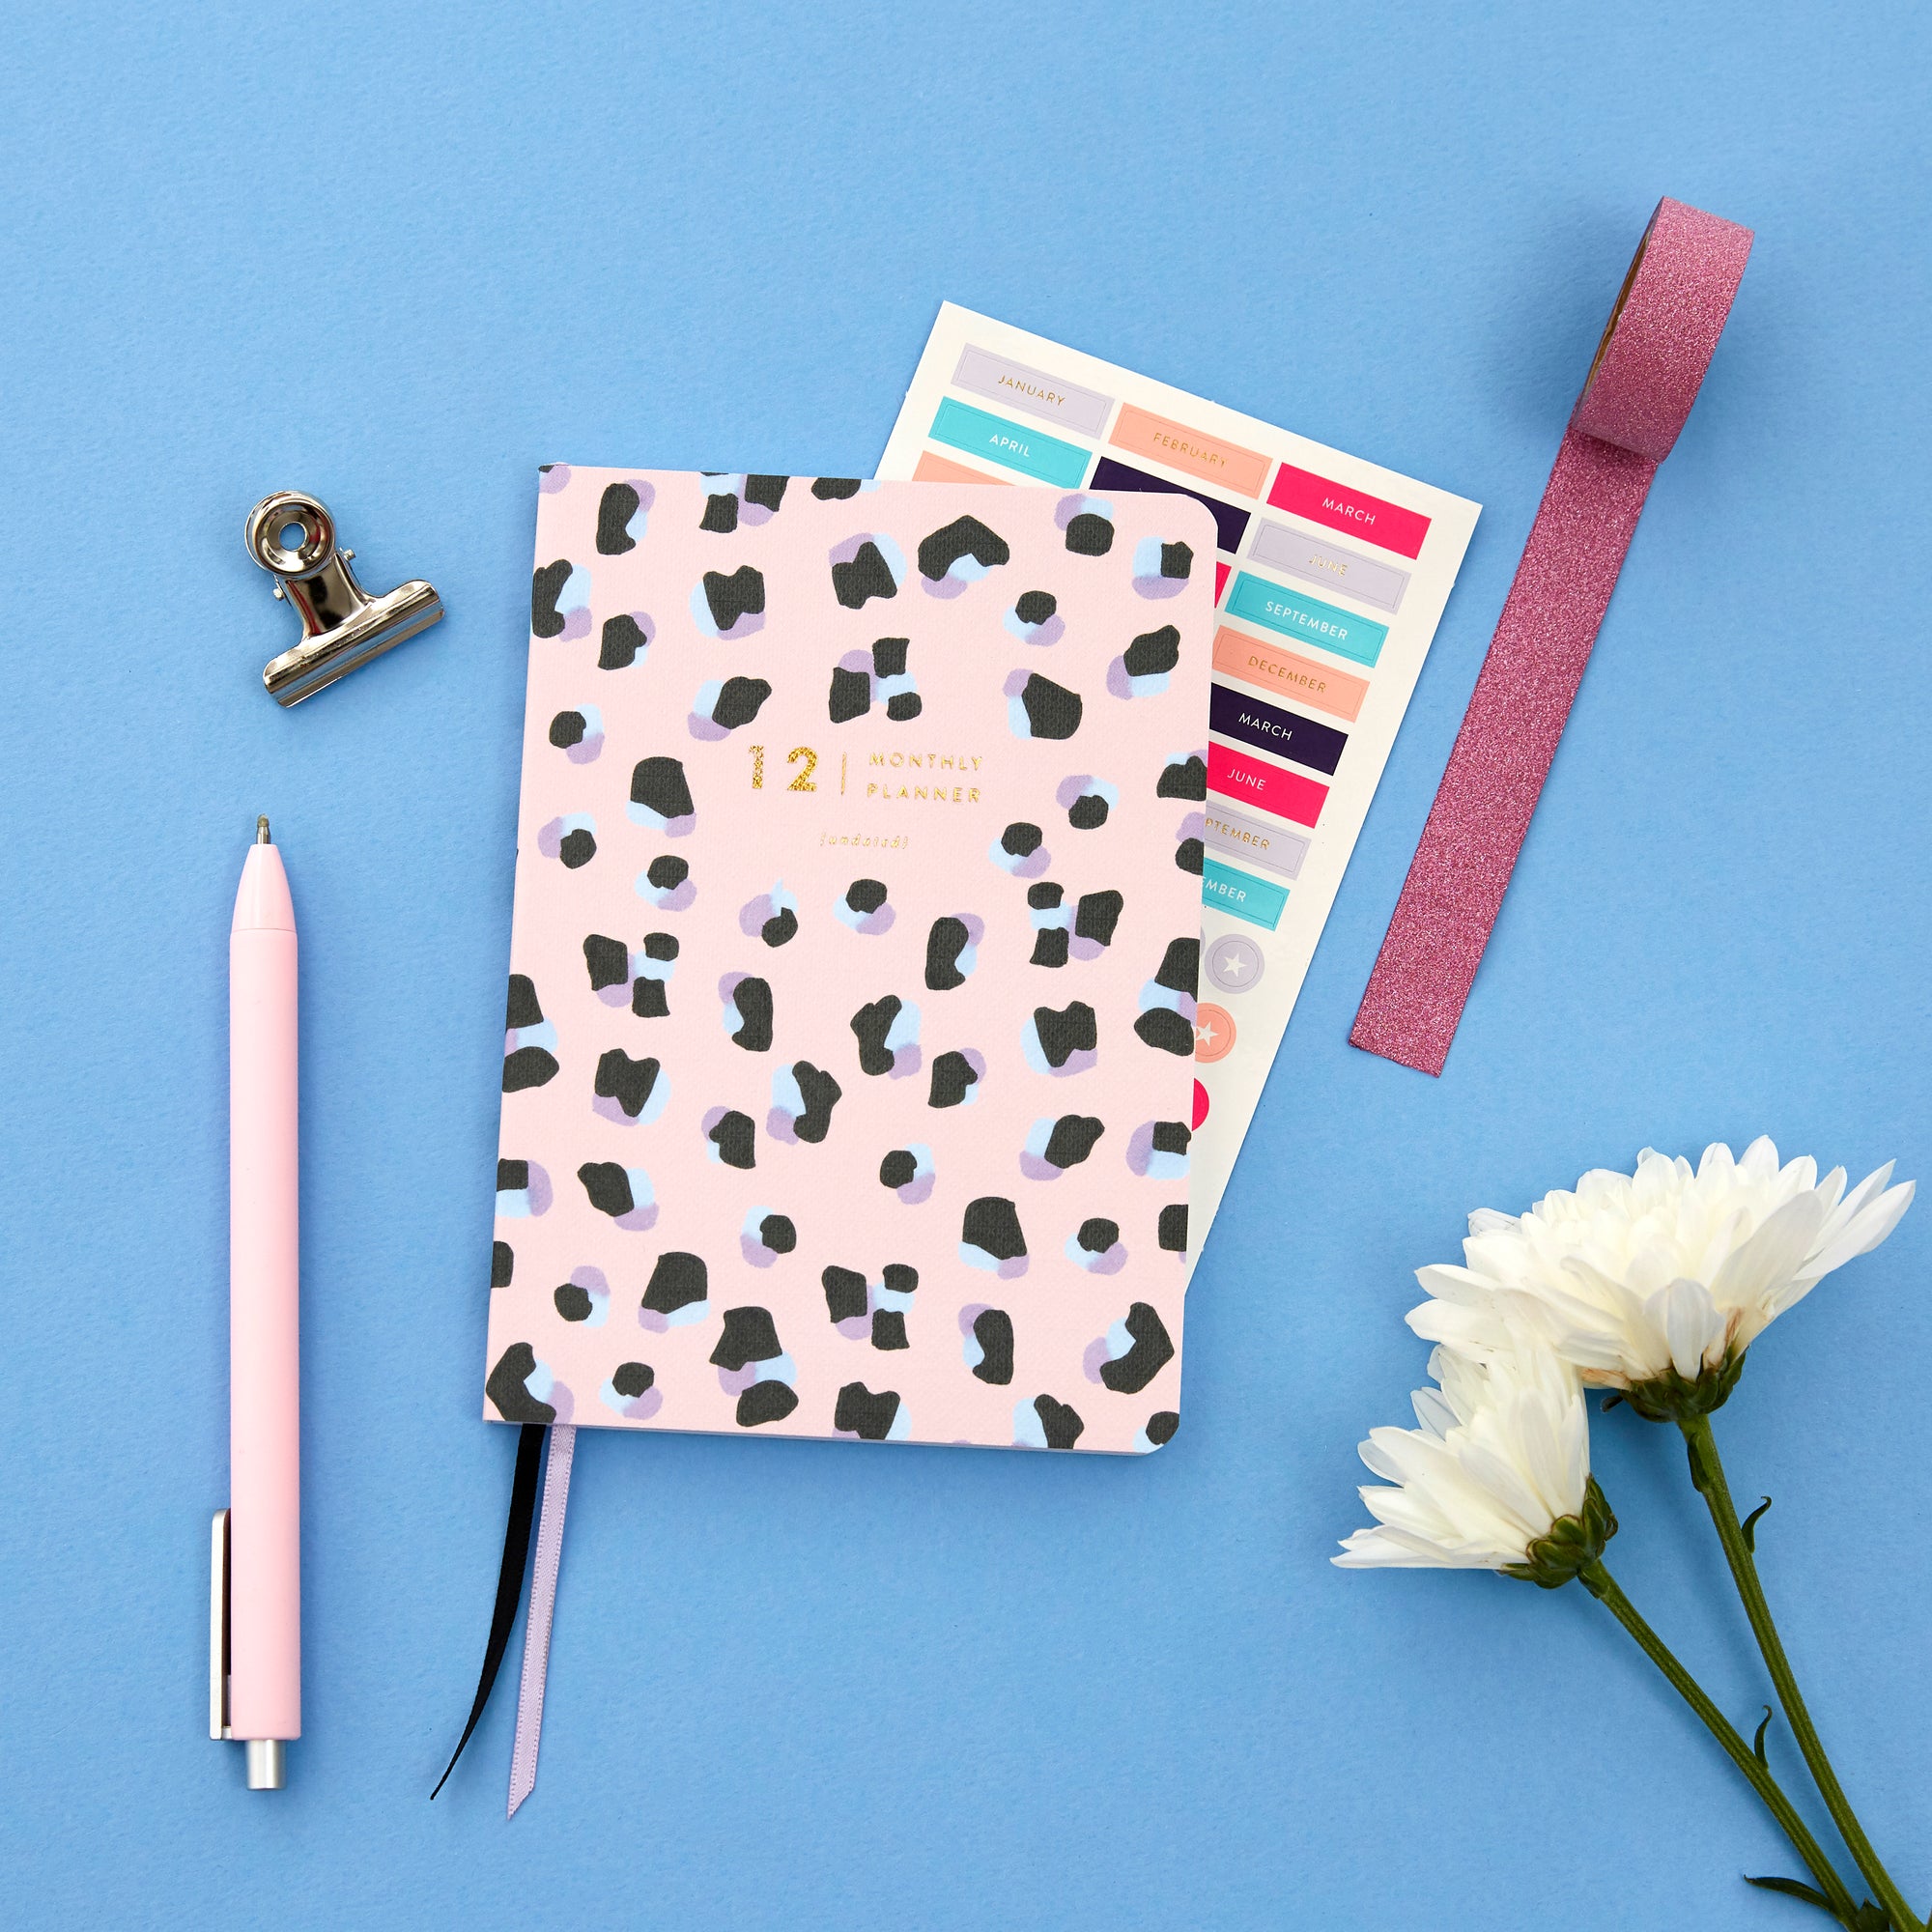 Amelia Lane Monthly Planners (Undated, Leopard)